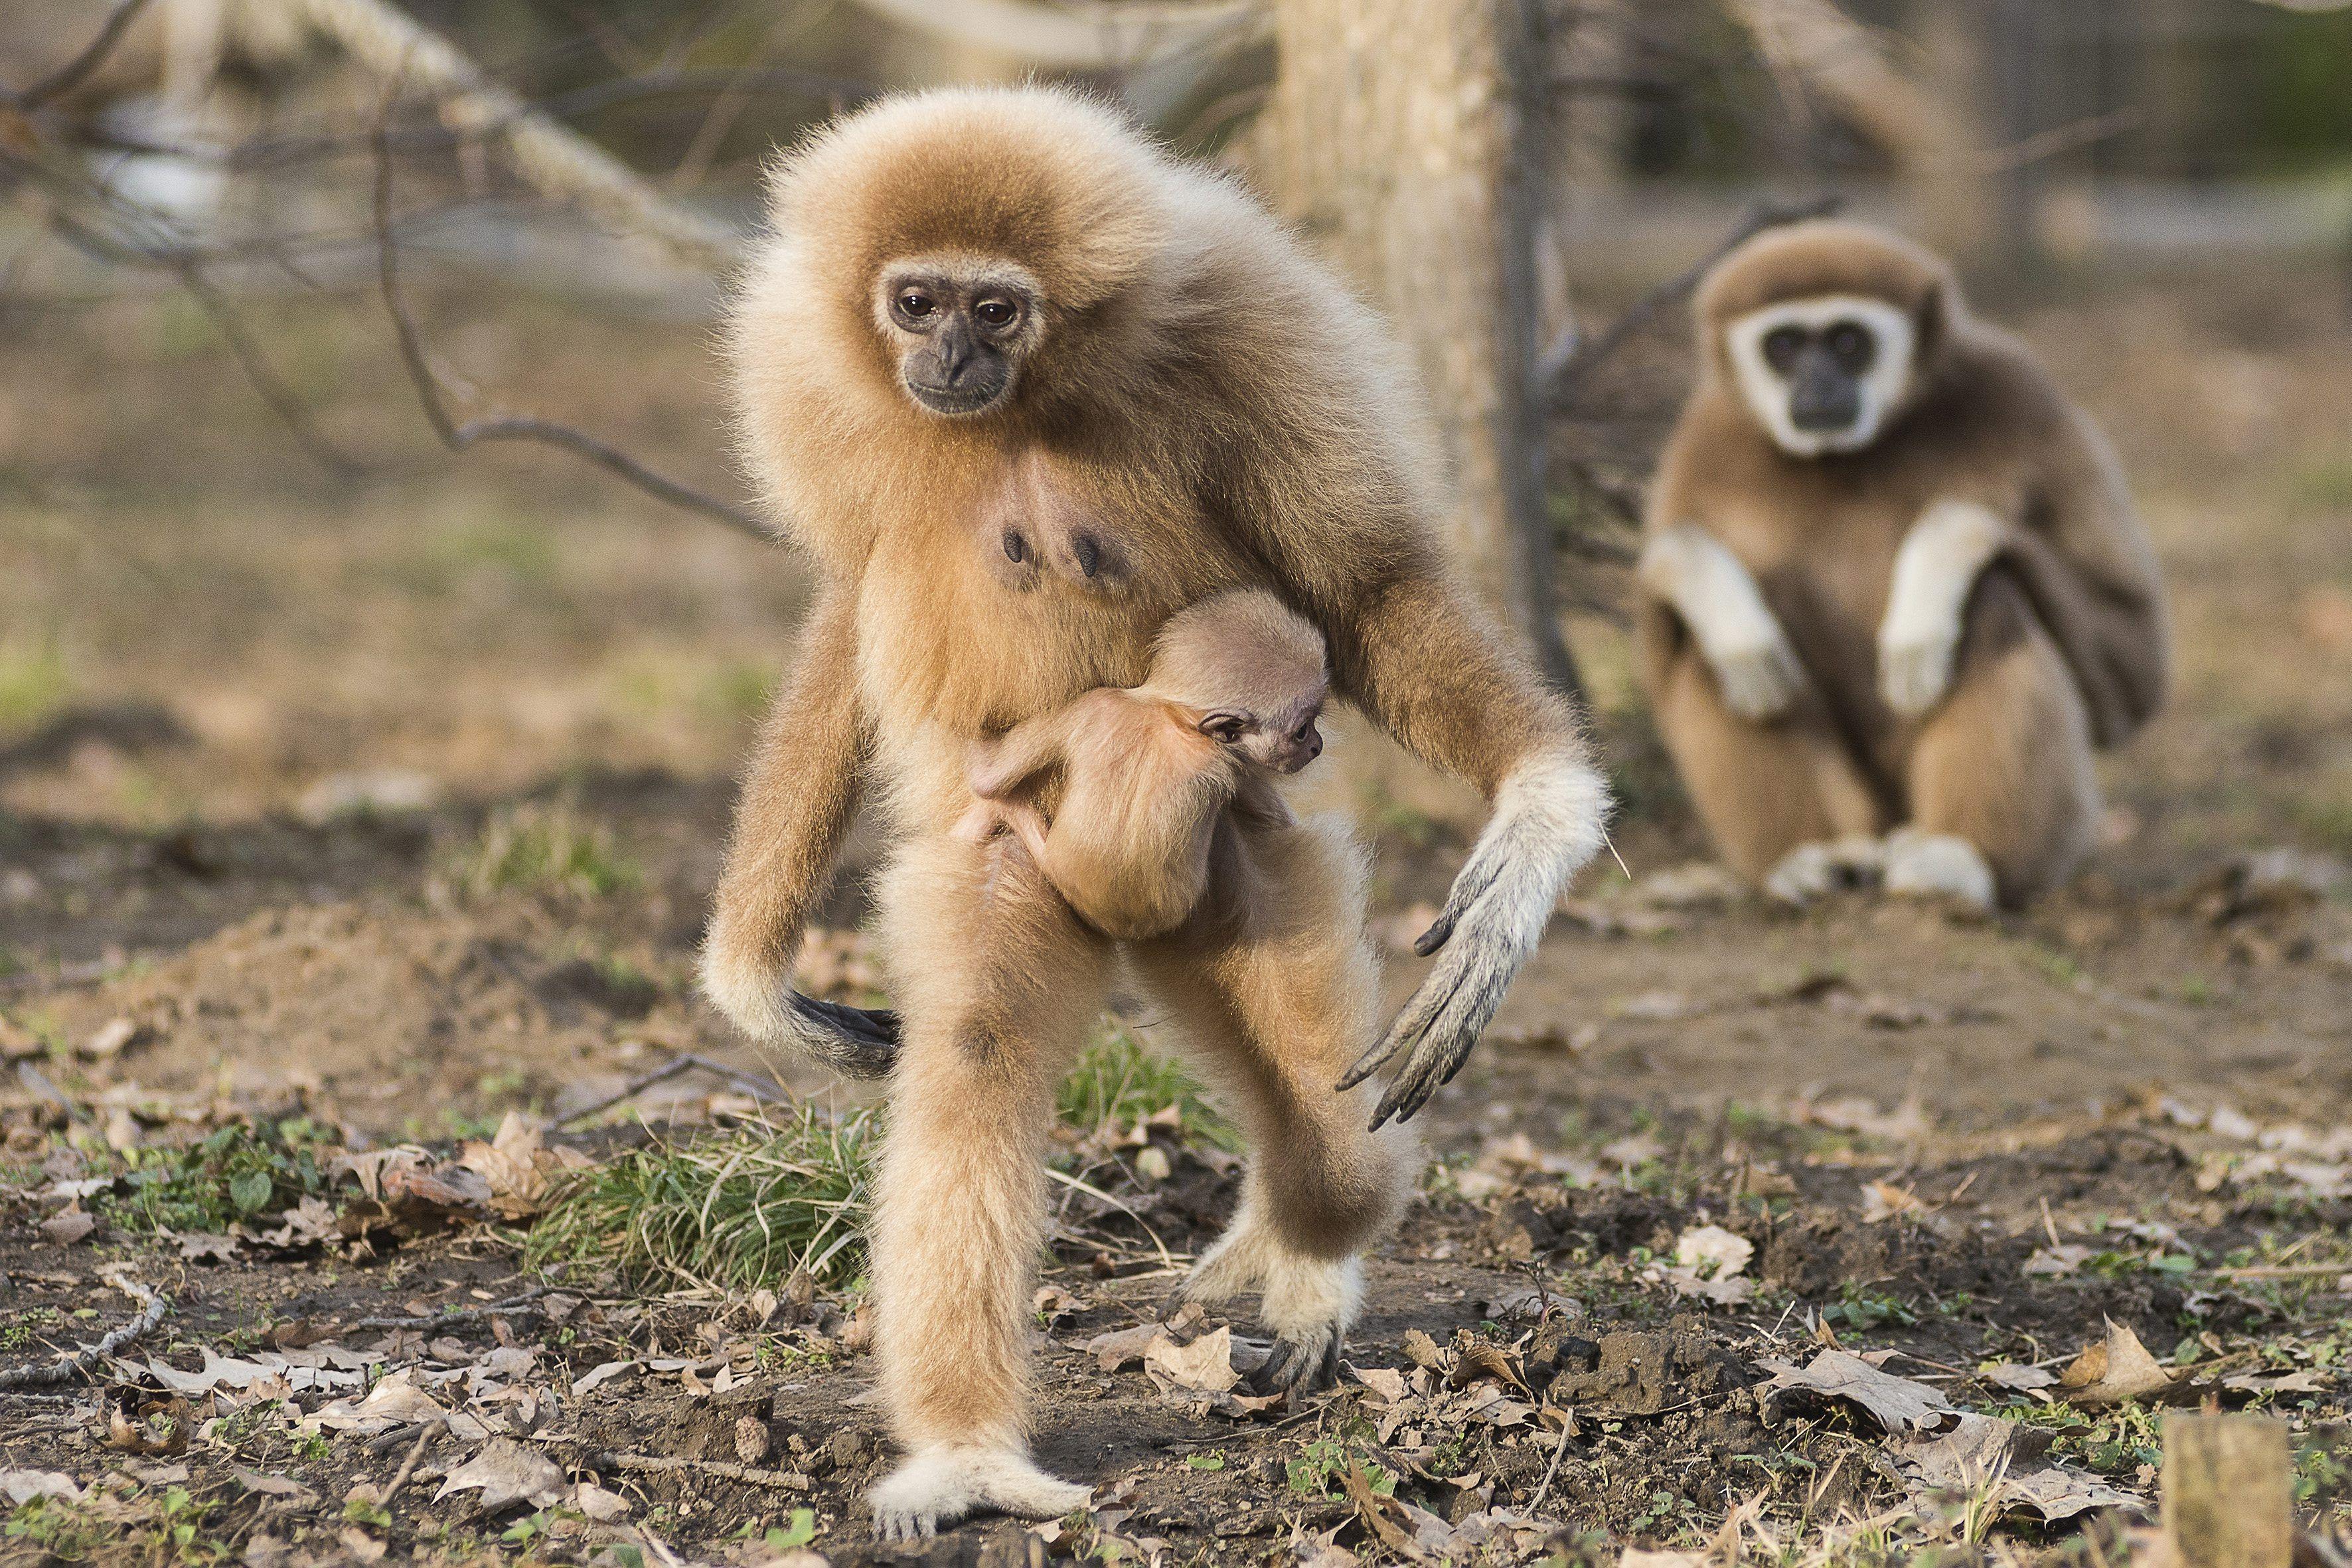 A Two Month Baby Lar Or White Handed Gibbon Hylobates Lar